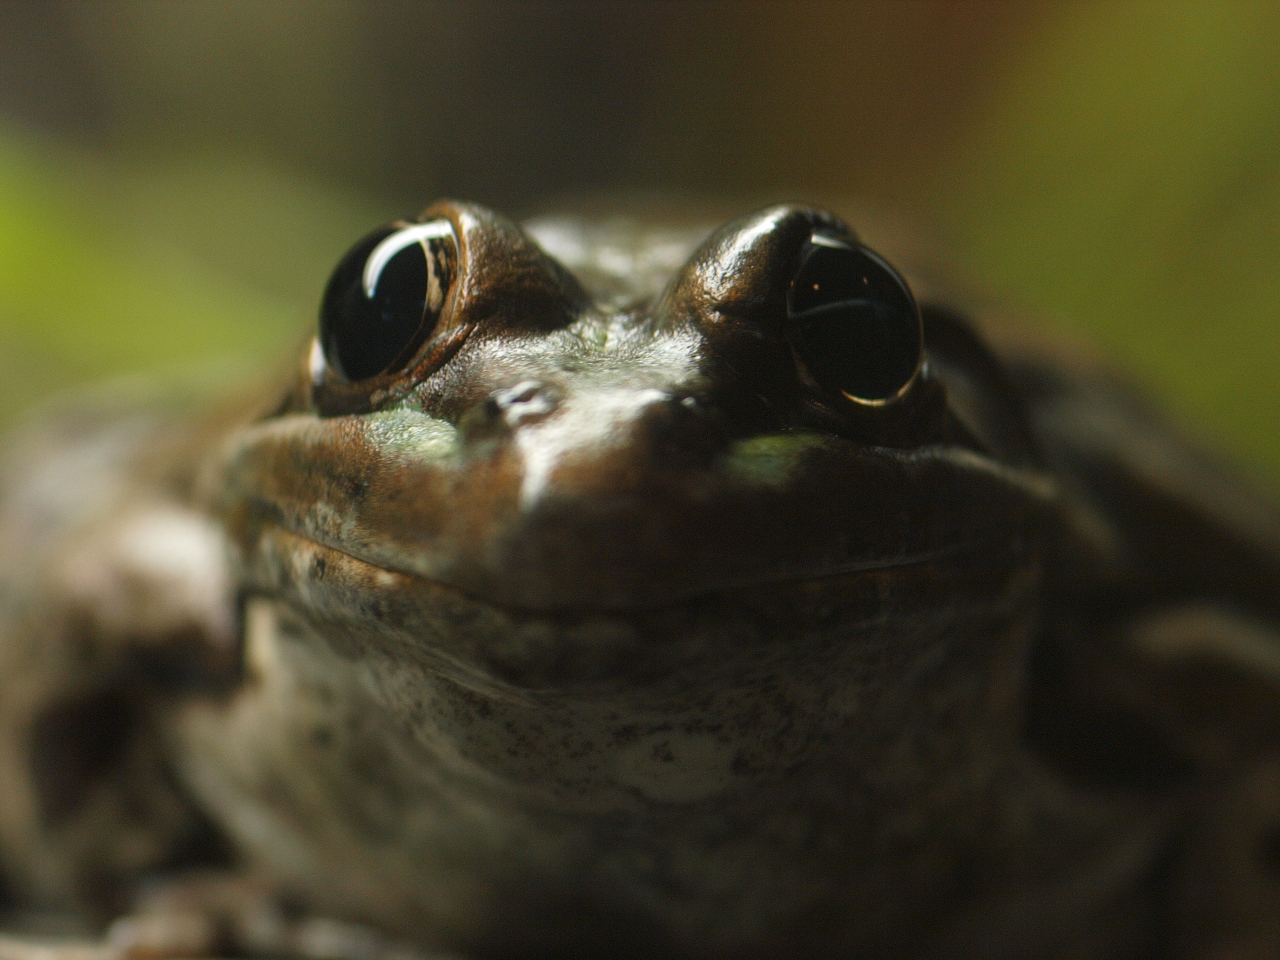 a close up of a frog with eyes looking at soing